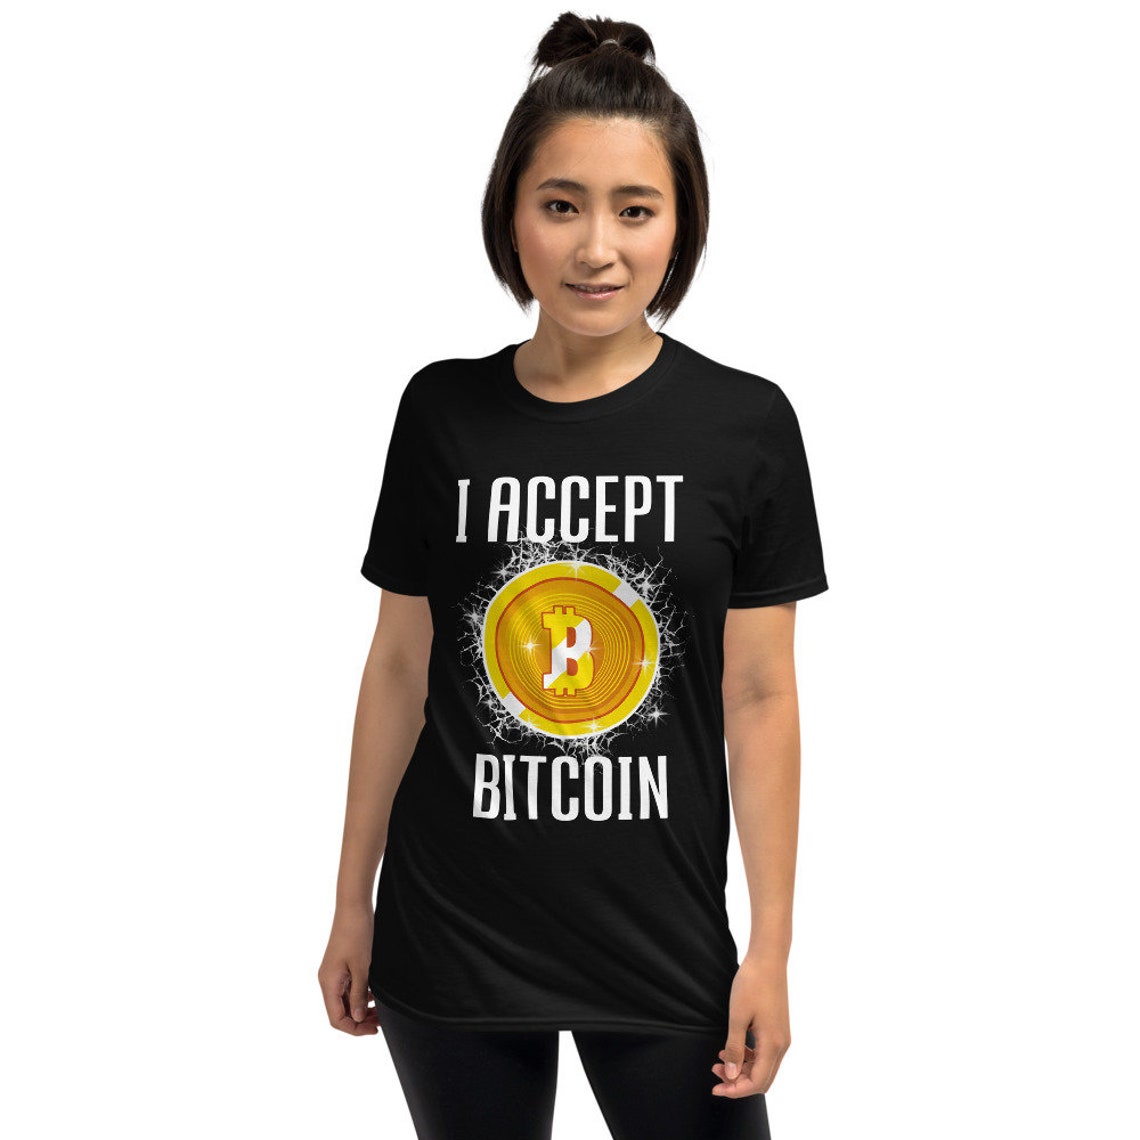 I Accept Bitcoin Shirt Digital Cryptocurrency Shirt BTC in | Etsy